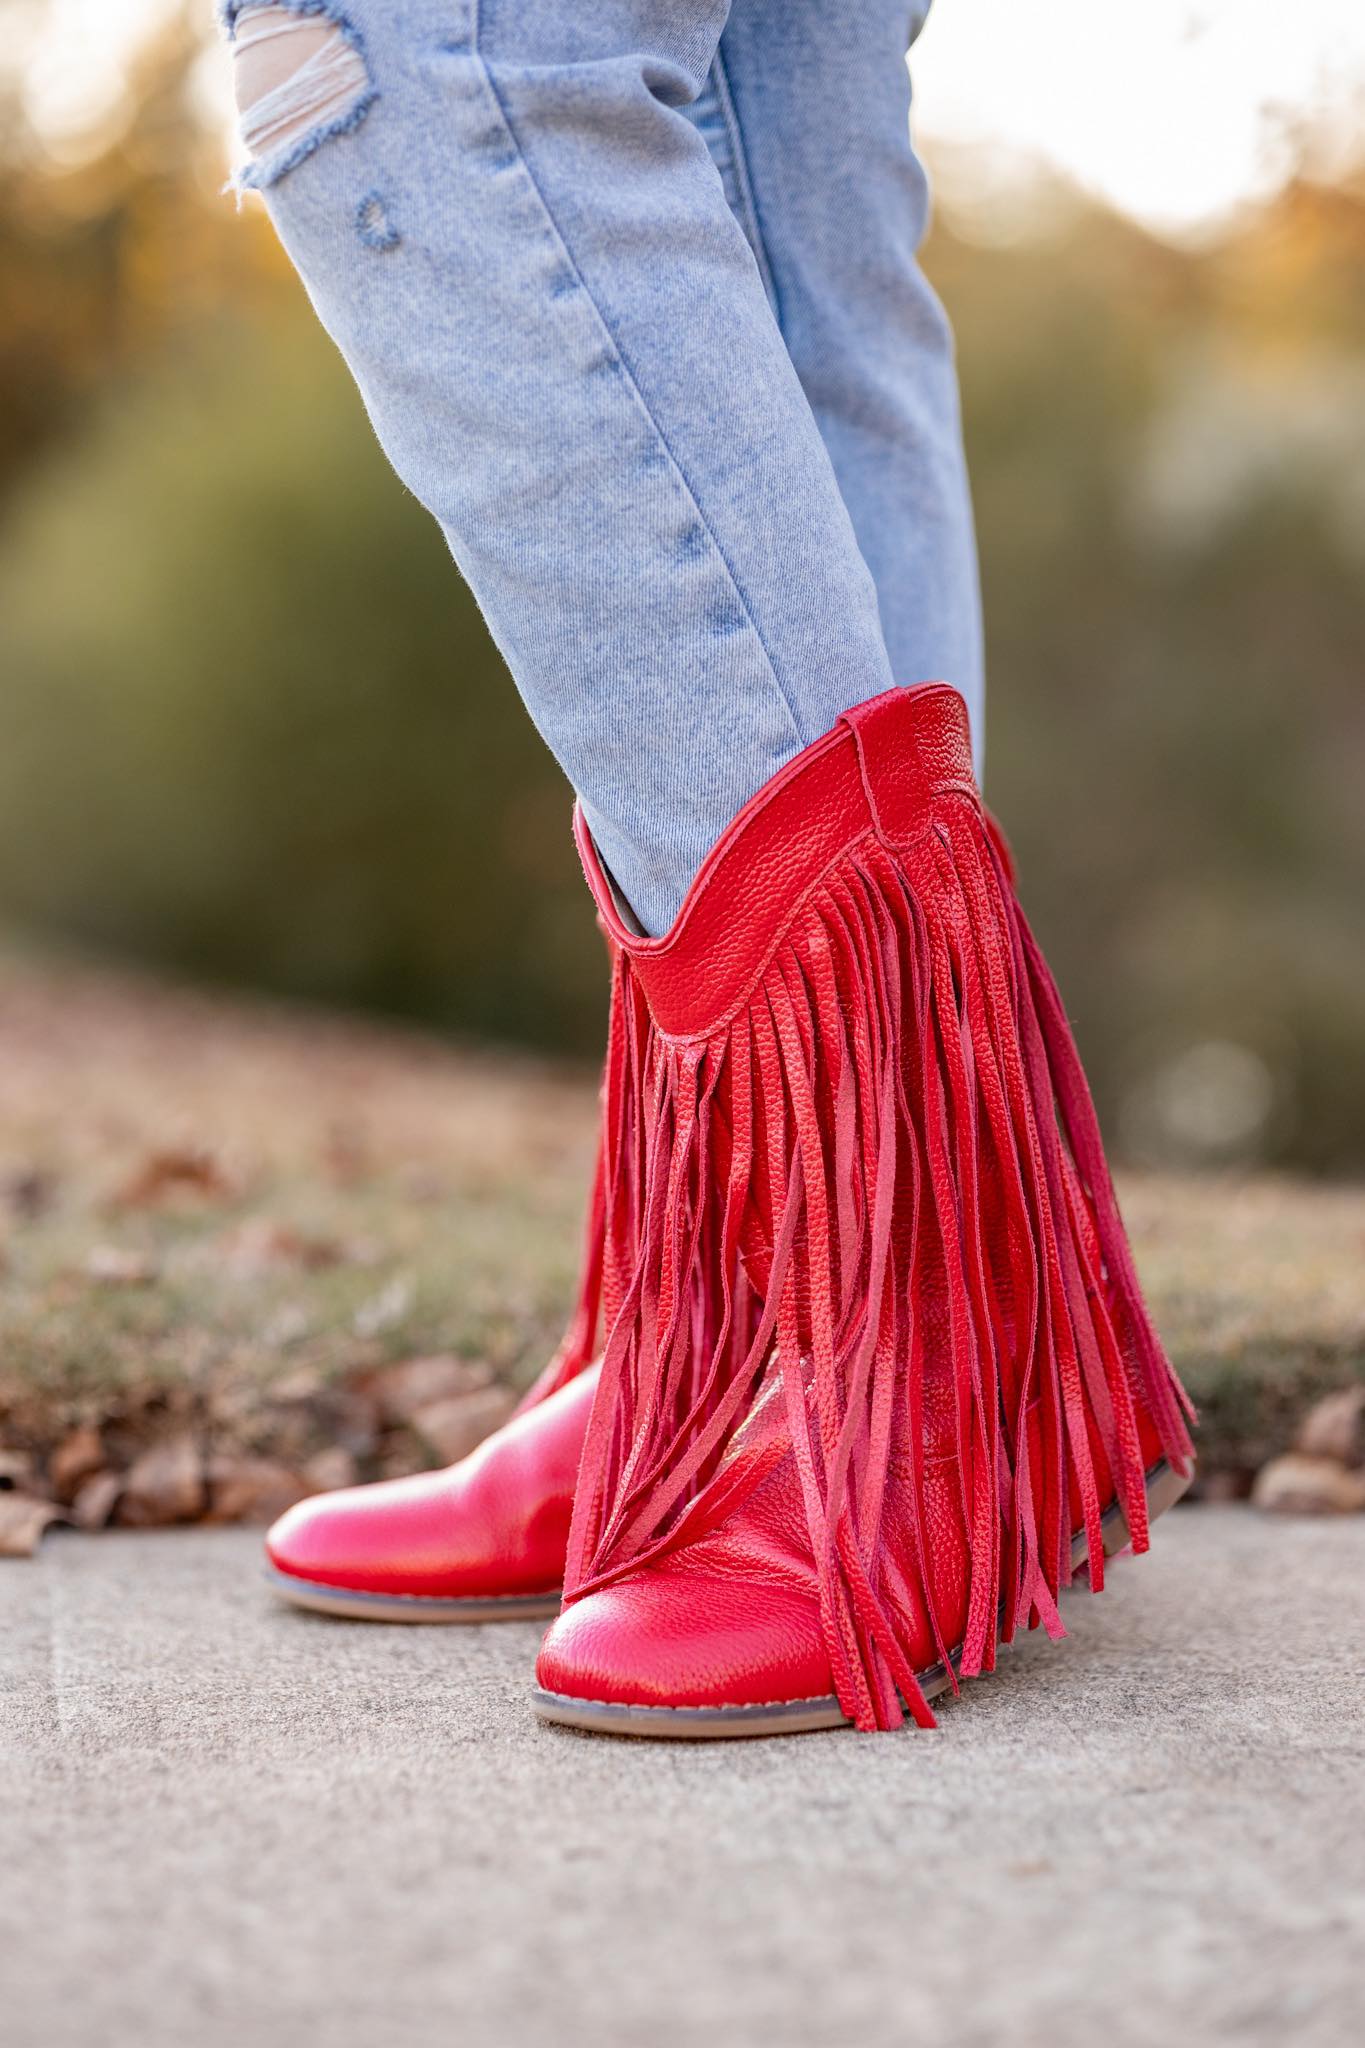 Red] Cowboy Boots – The Spotted Phoenix, LLC